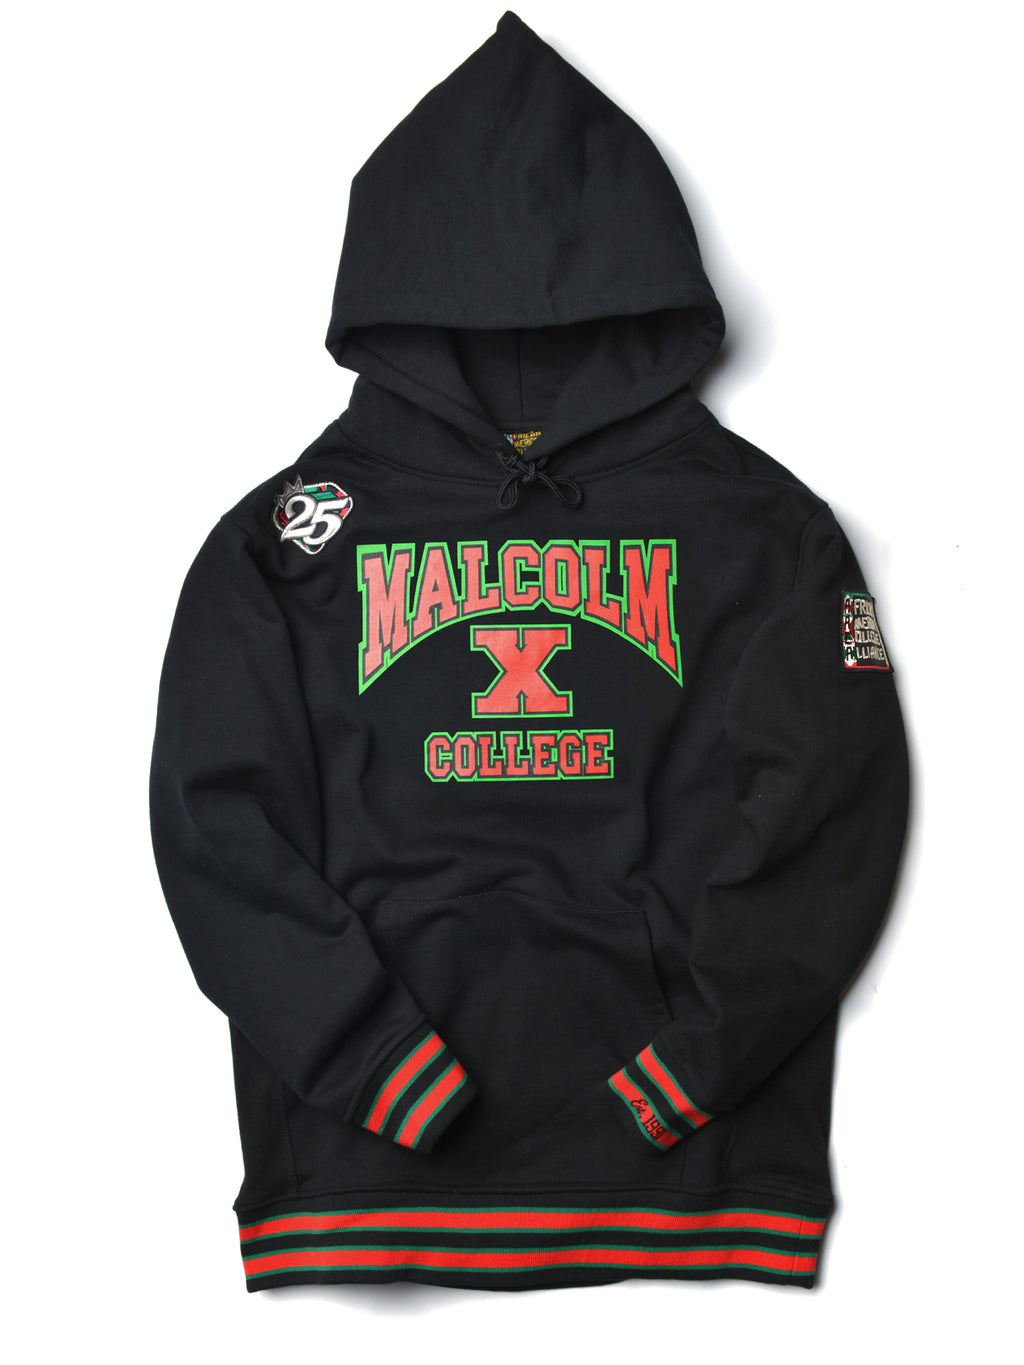 Glass House Apparel Malcolm x Hip Hop Radio Hoodie, Adult Unisex, Size: Large, Blue